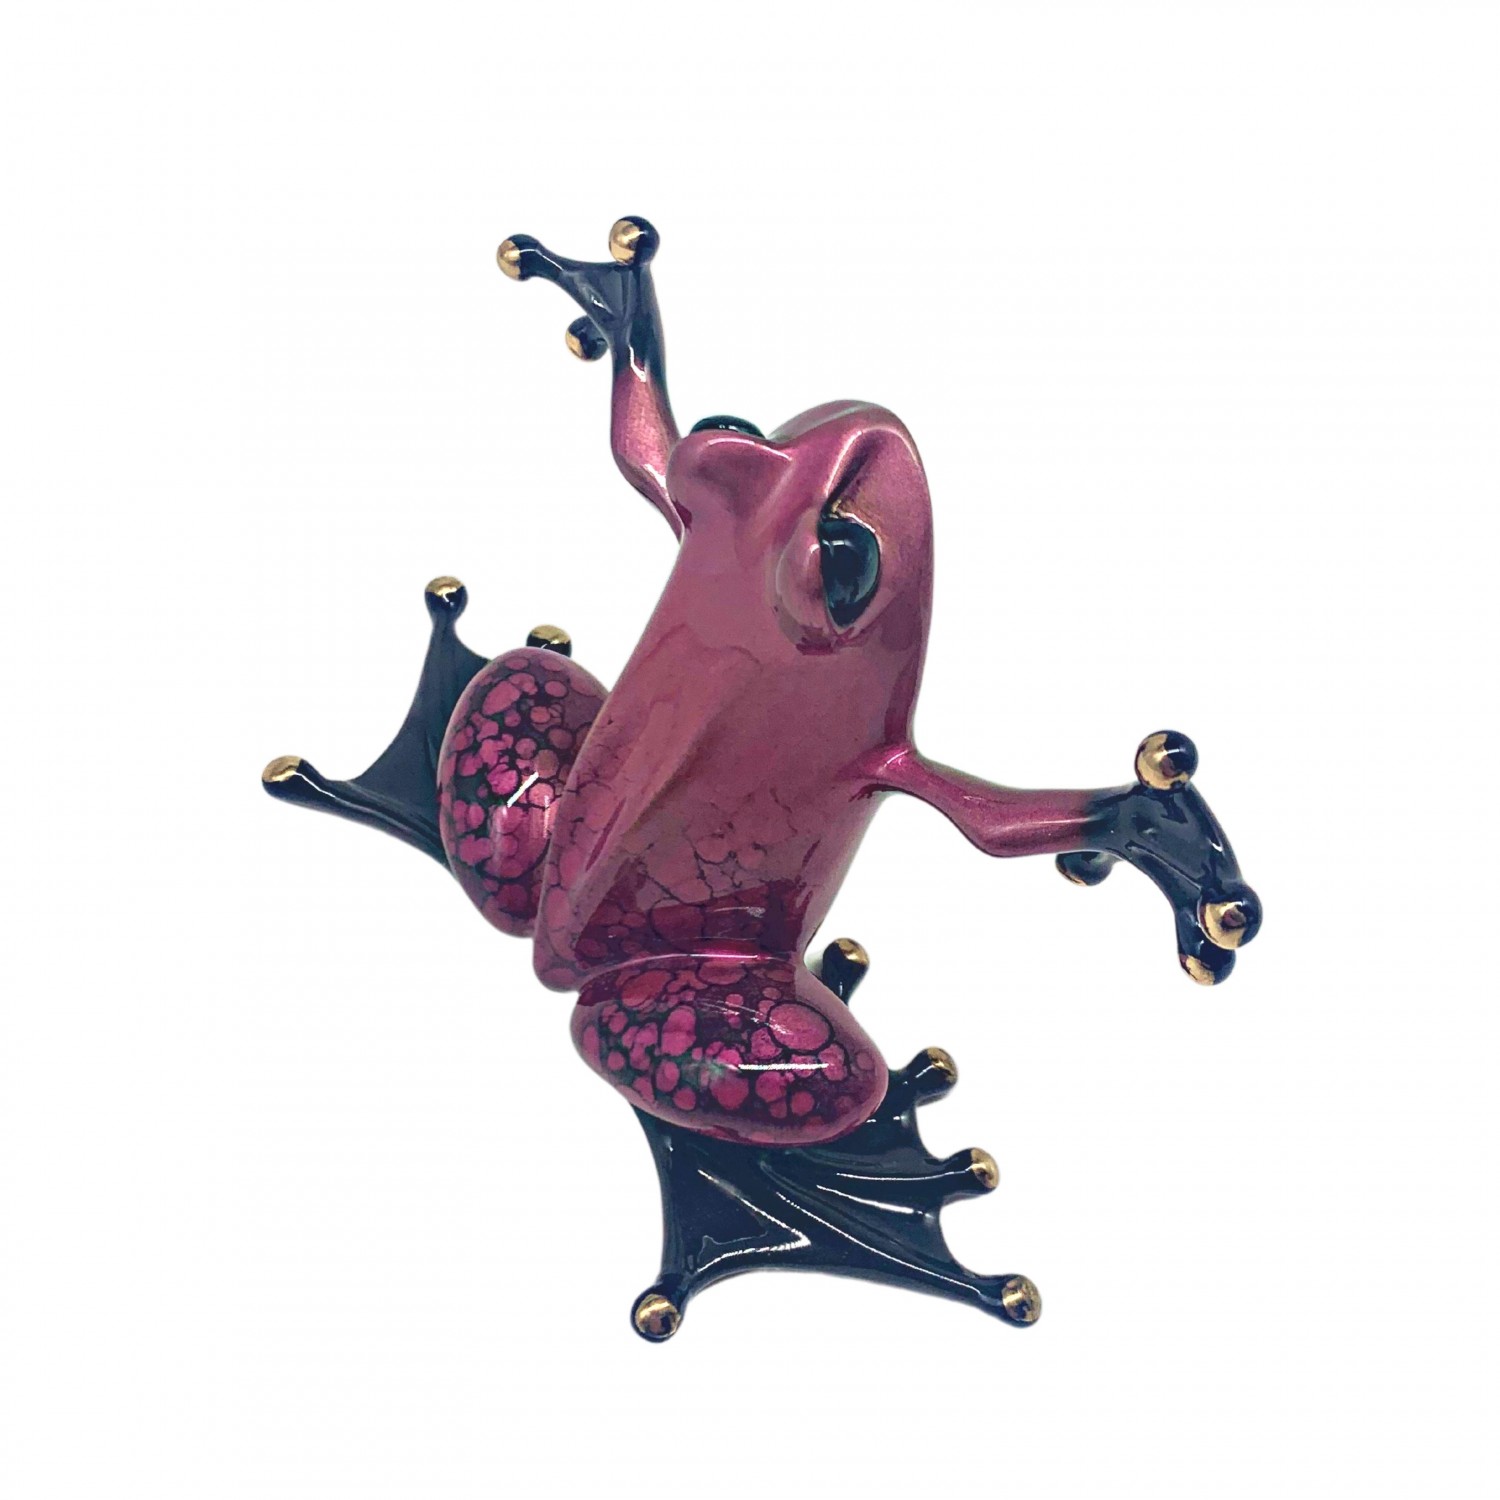 Signed, limited edition frog sculpture by Tim FROGMAN Cotterill